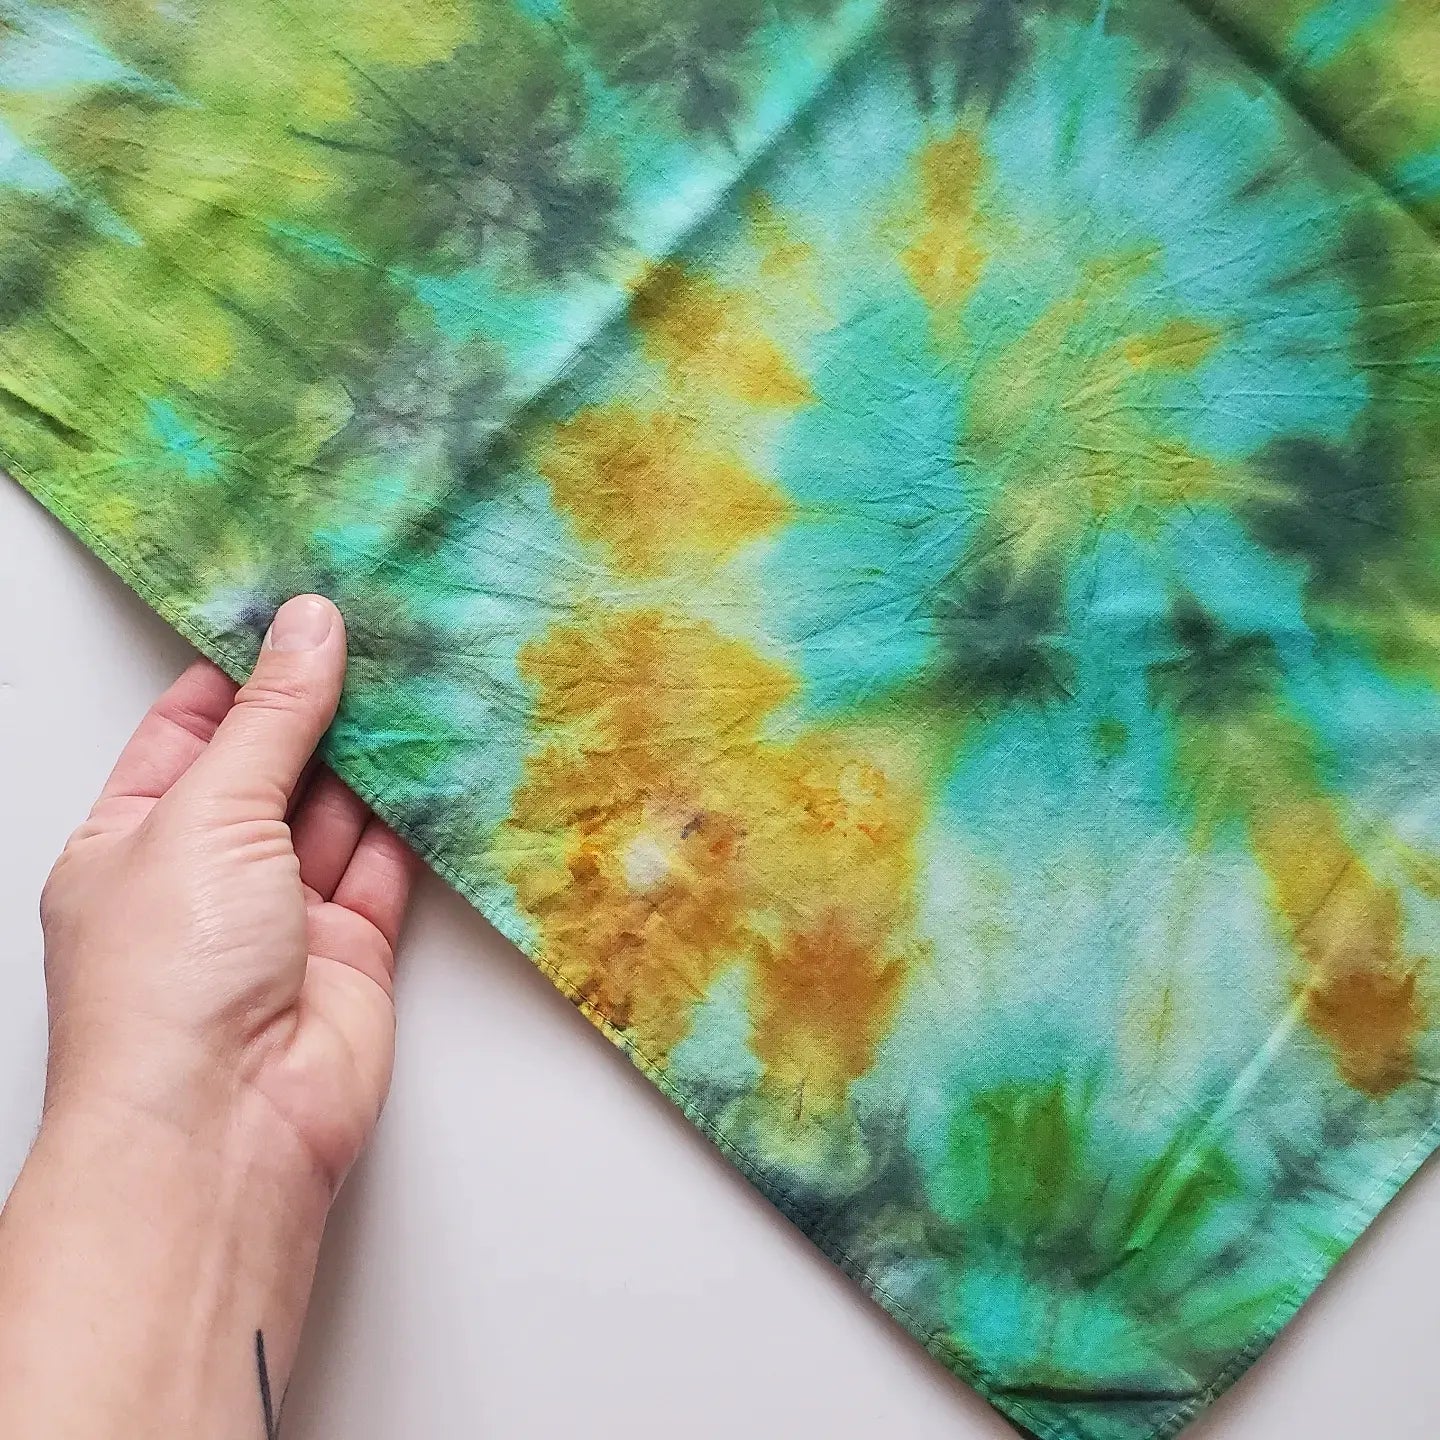 Ice Dye Workshop @ Home Malone Mid-City March 19th